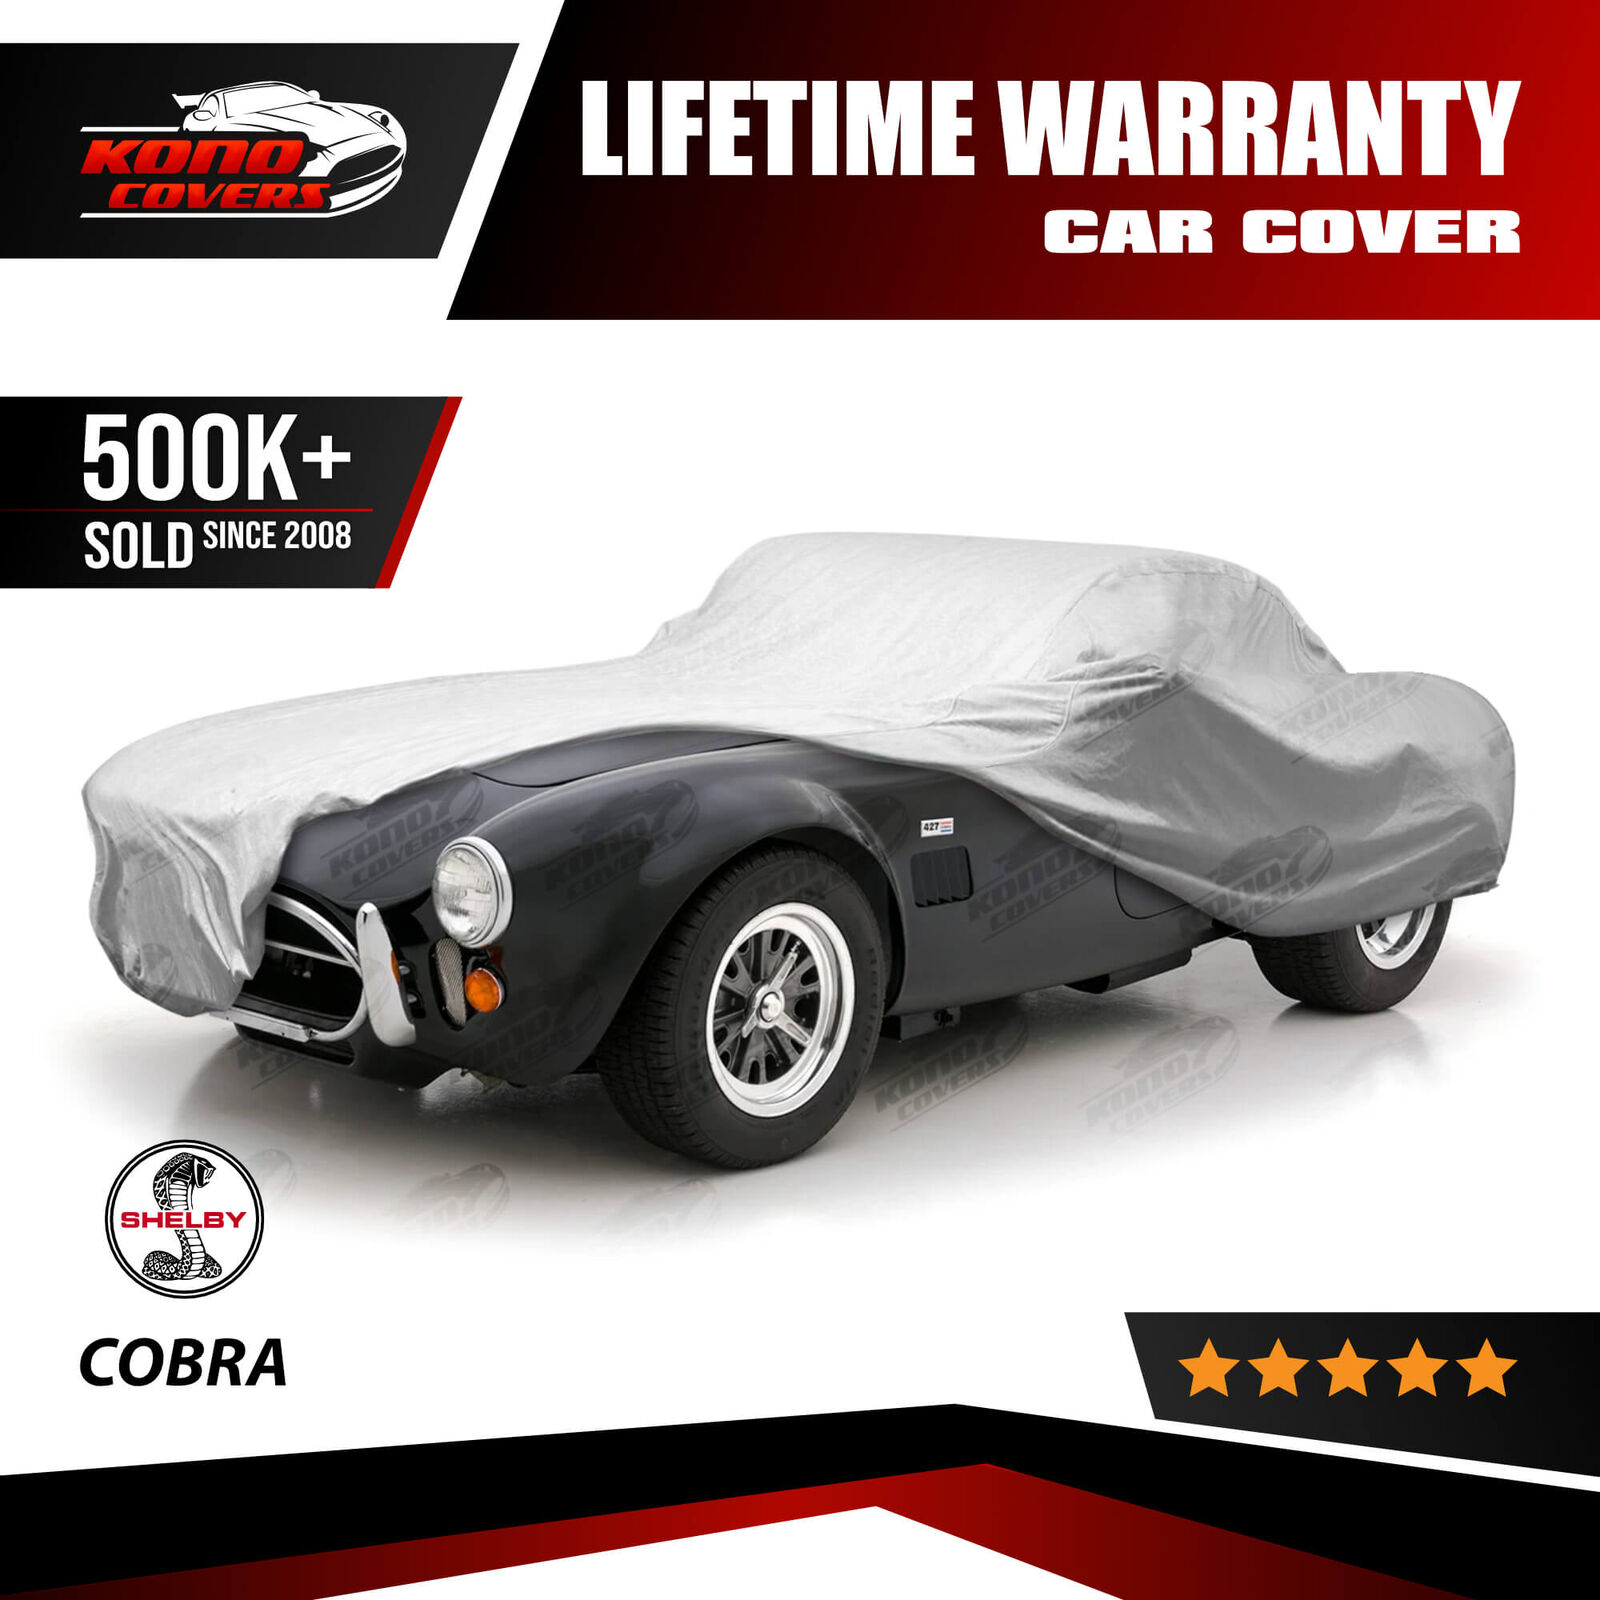 Shelby Cobra 4 Layer Waterproof Car Cover 1962 1963 1964 1965 1966 1967